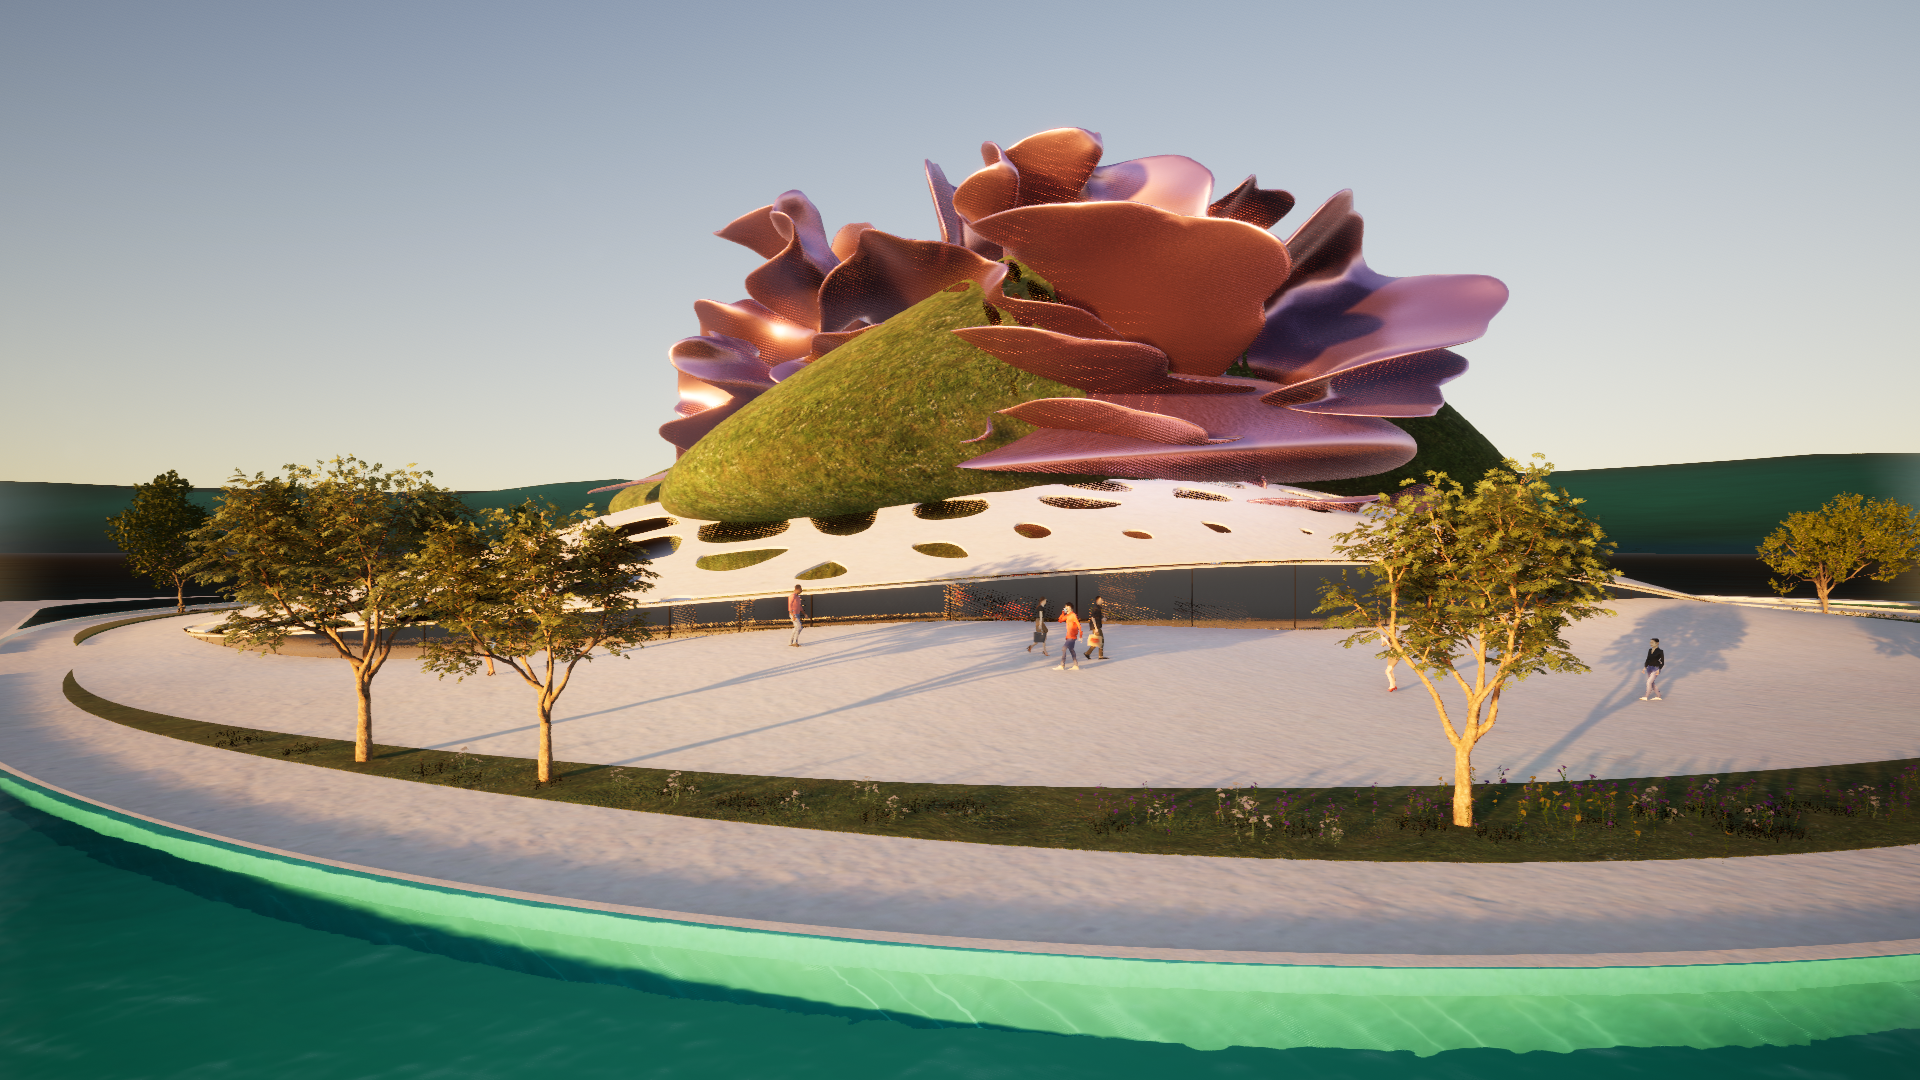 Debbie-Flevotomou-Architects-The-Great-Reef-2024-Kinetic-Architecture-Parametric-design-12.png